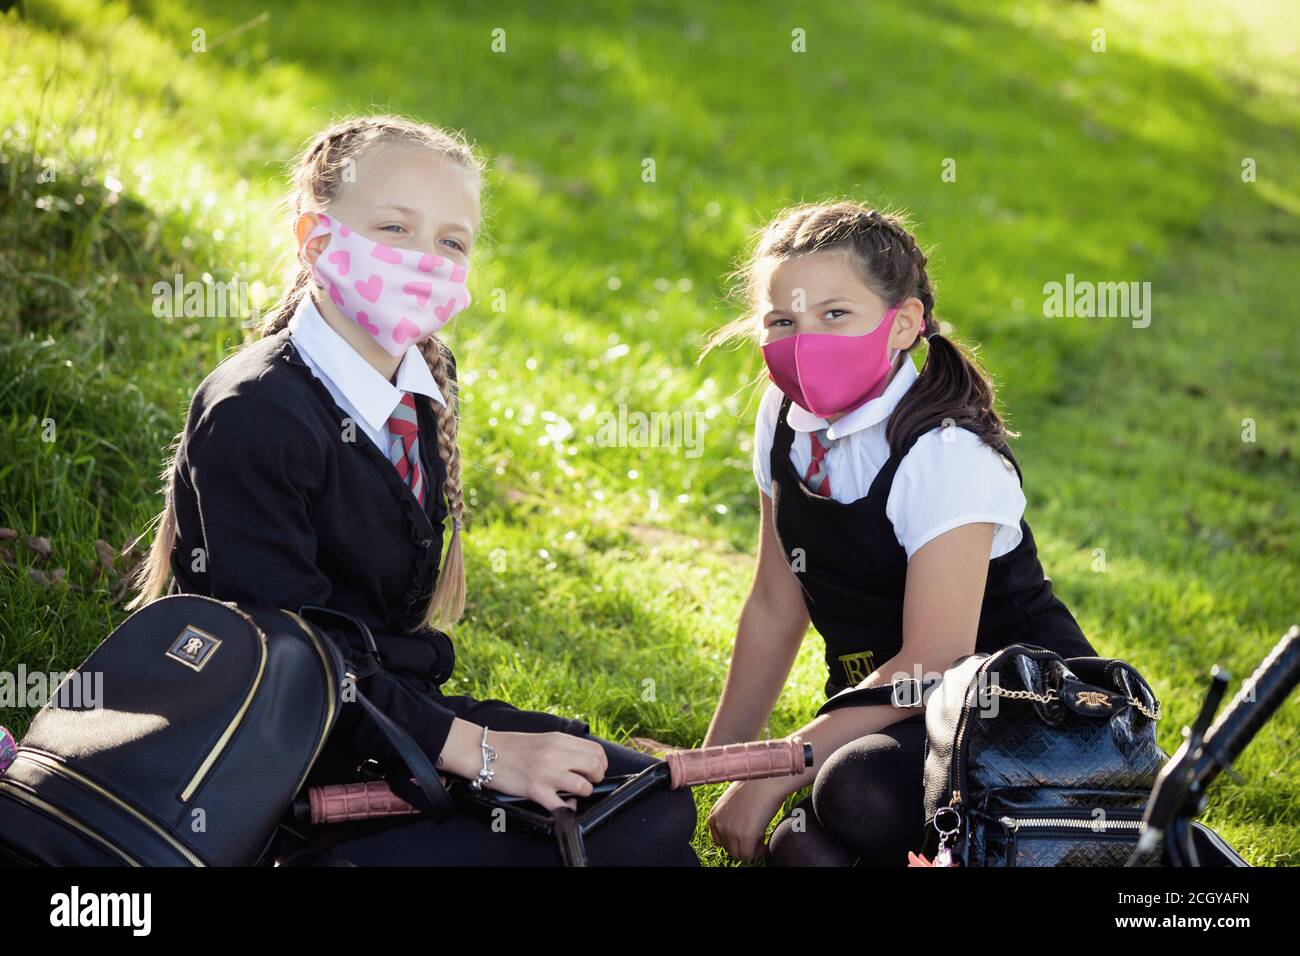 Two young school children wearing school uniform and face masks looking to camera, Scotland, UK Stock Photo